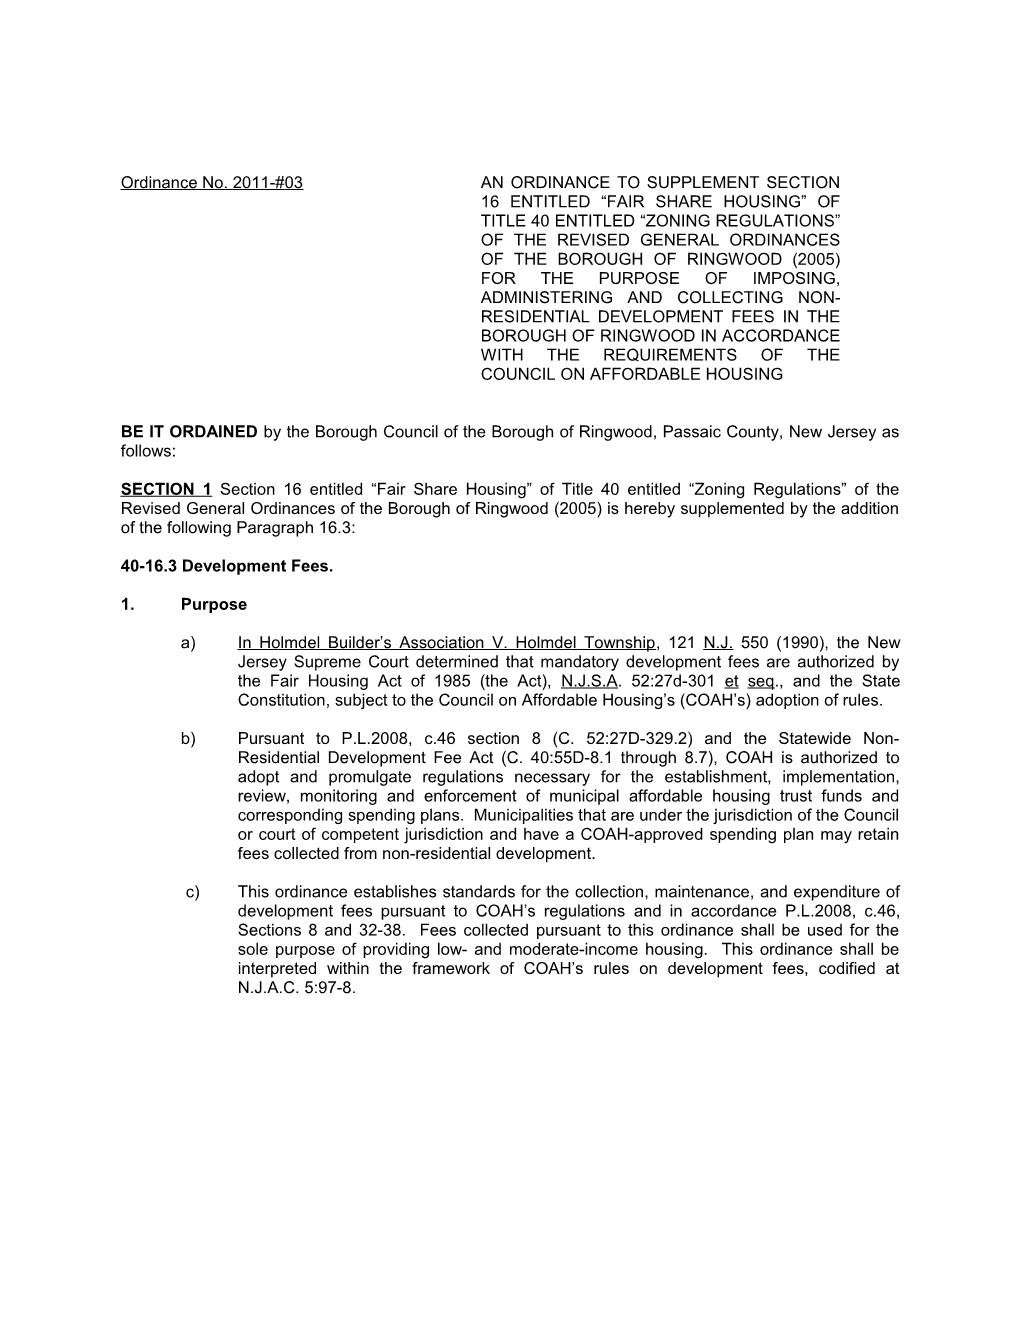 Ordinance No. 2011-#03 an ORDINANCE to SUPPLEMENT SECTION 16 ENTITLED FAIR SHARE HOUSING